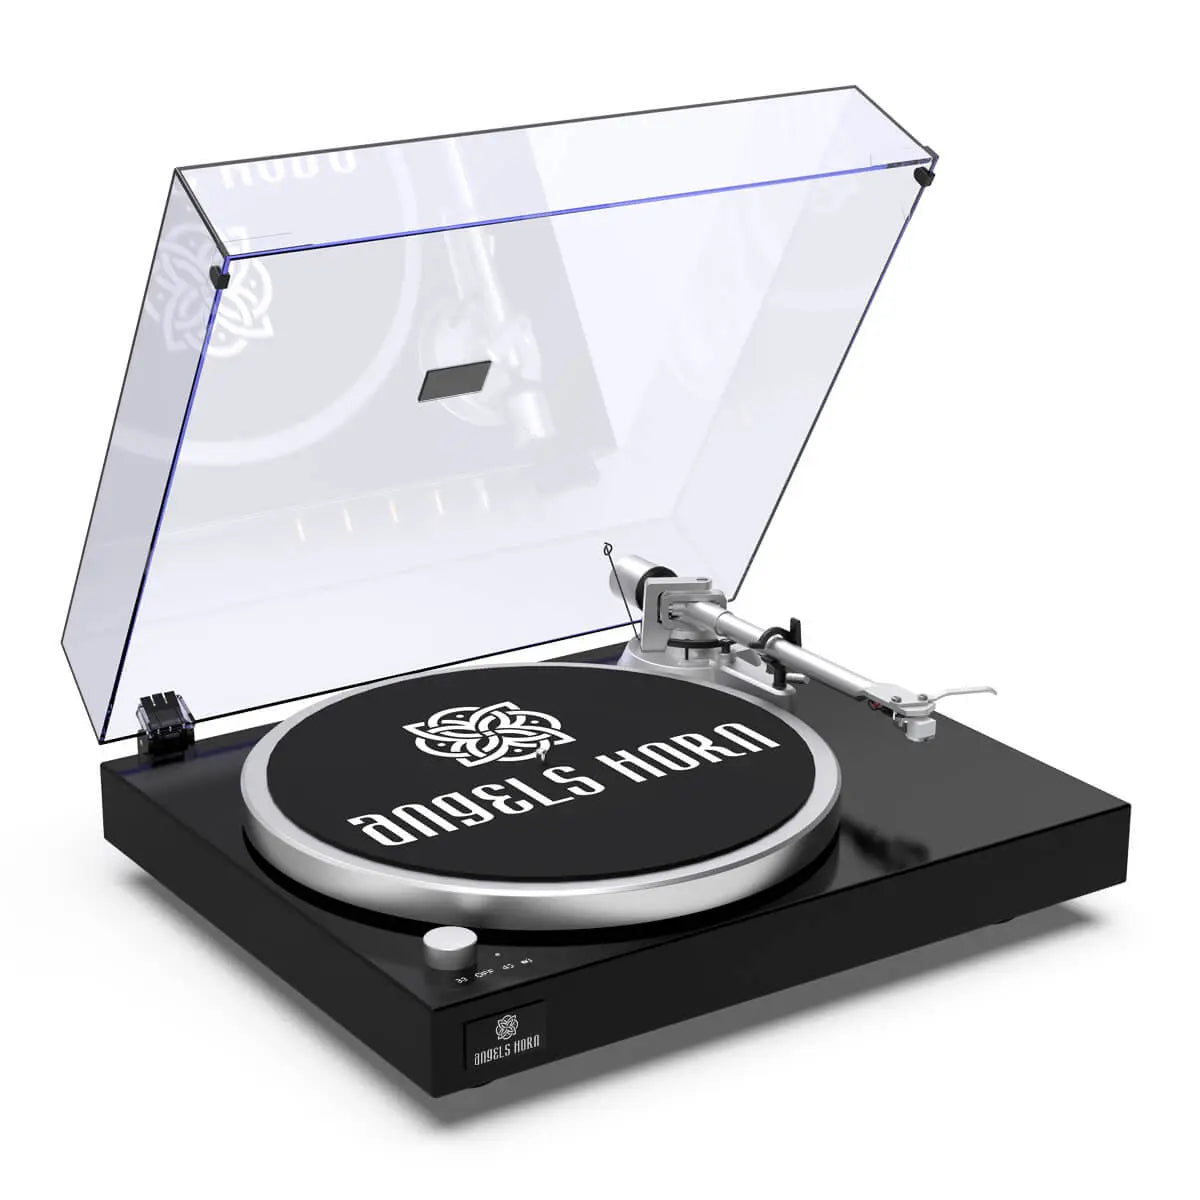 Best record player 2021: Retro, manual and Bluetooth turntables